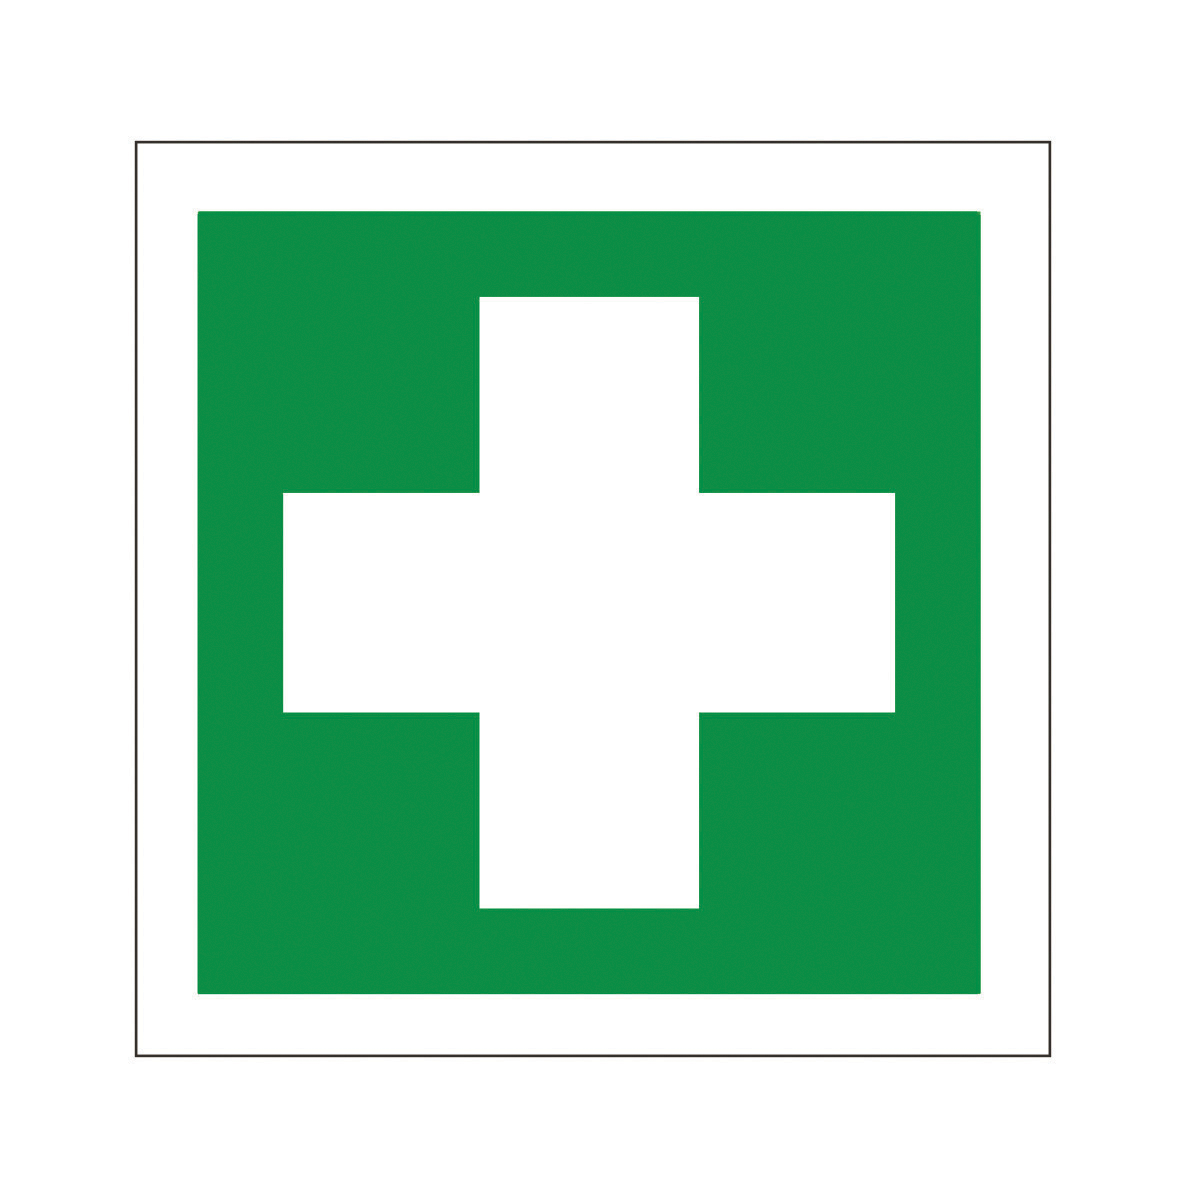 Symbols Of Health And Safety In The Workplace - ClipArt Best